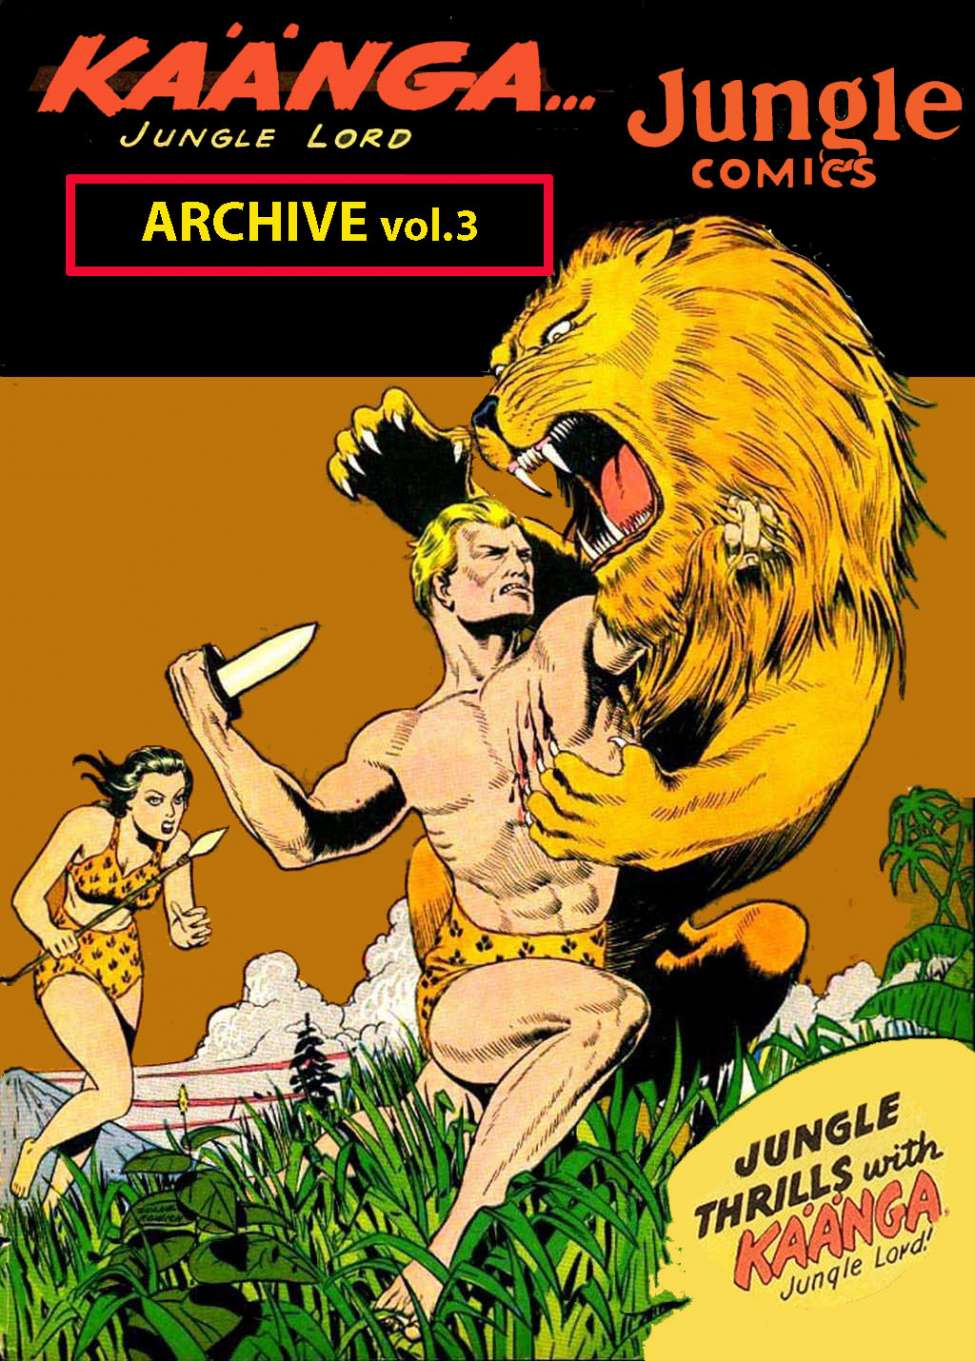 Book Cover For Kaanga vol.3 -Jungle Comics Archive (Fiction House)